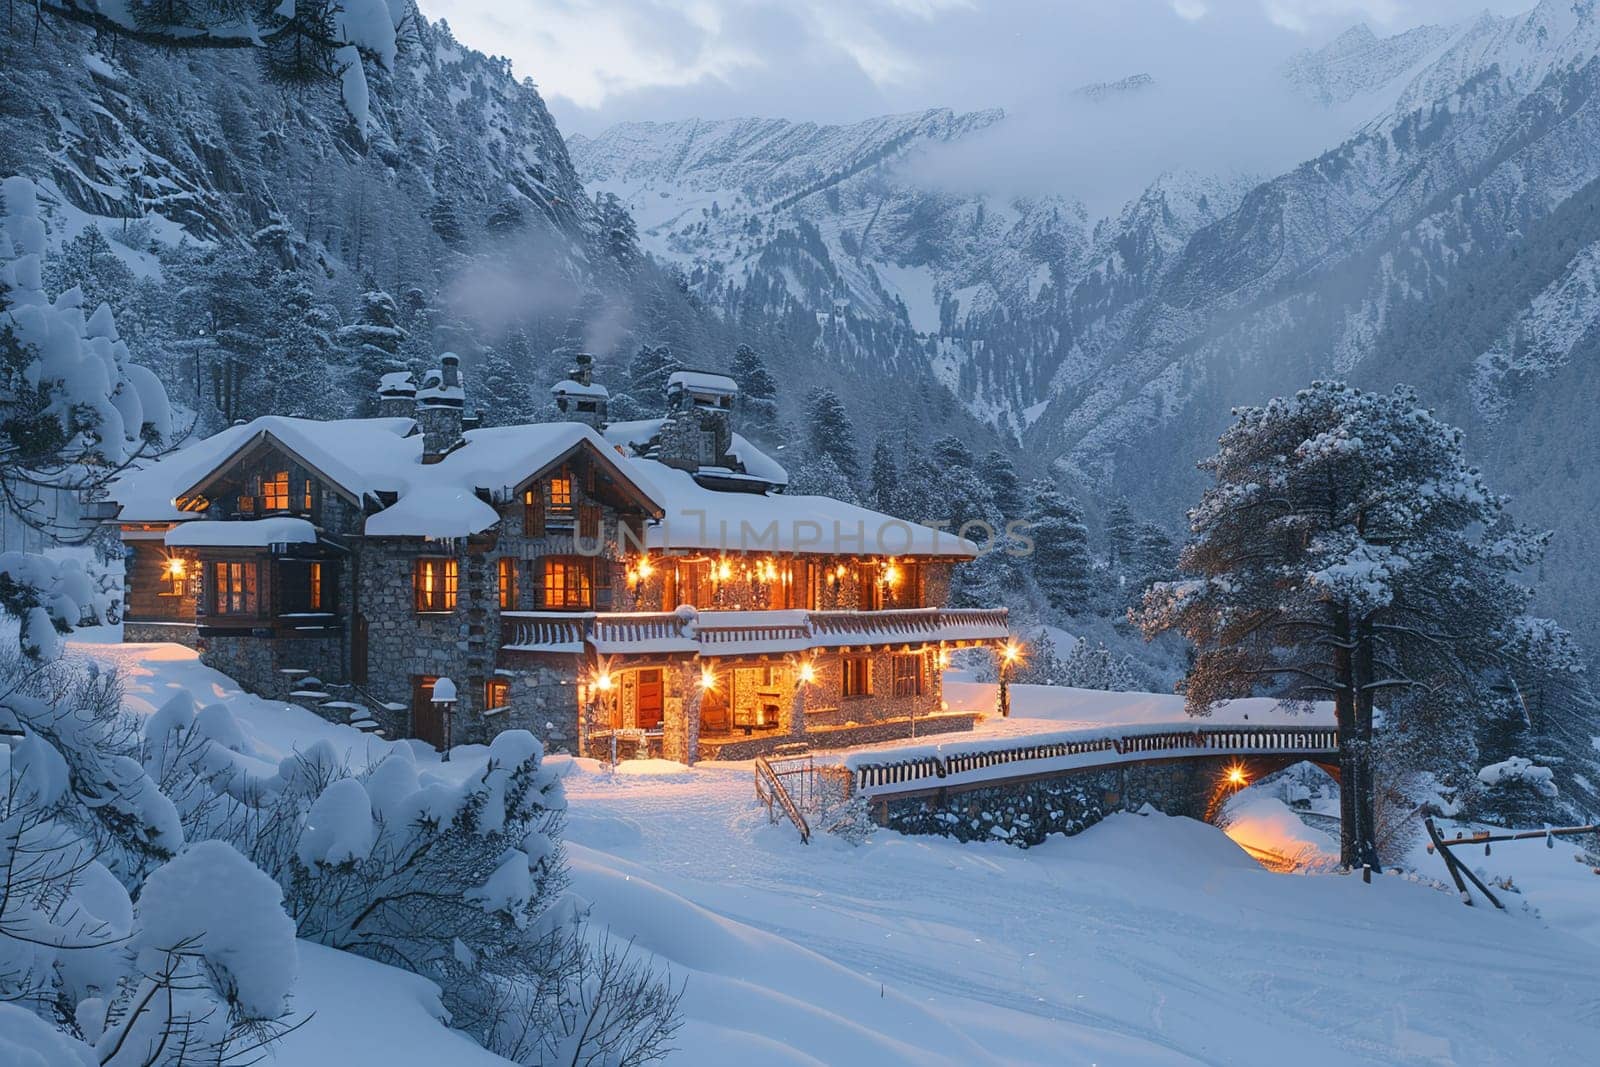 Remote Ski Lodge with Cozy Fireplaces and Snow-Covered Roofs, secluded ski lodge for winter sports enthusiasts.